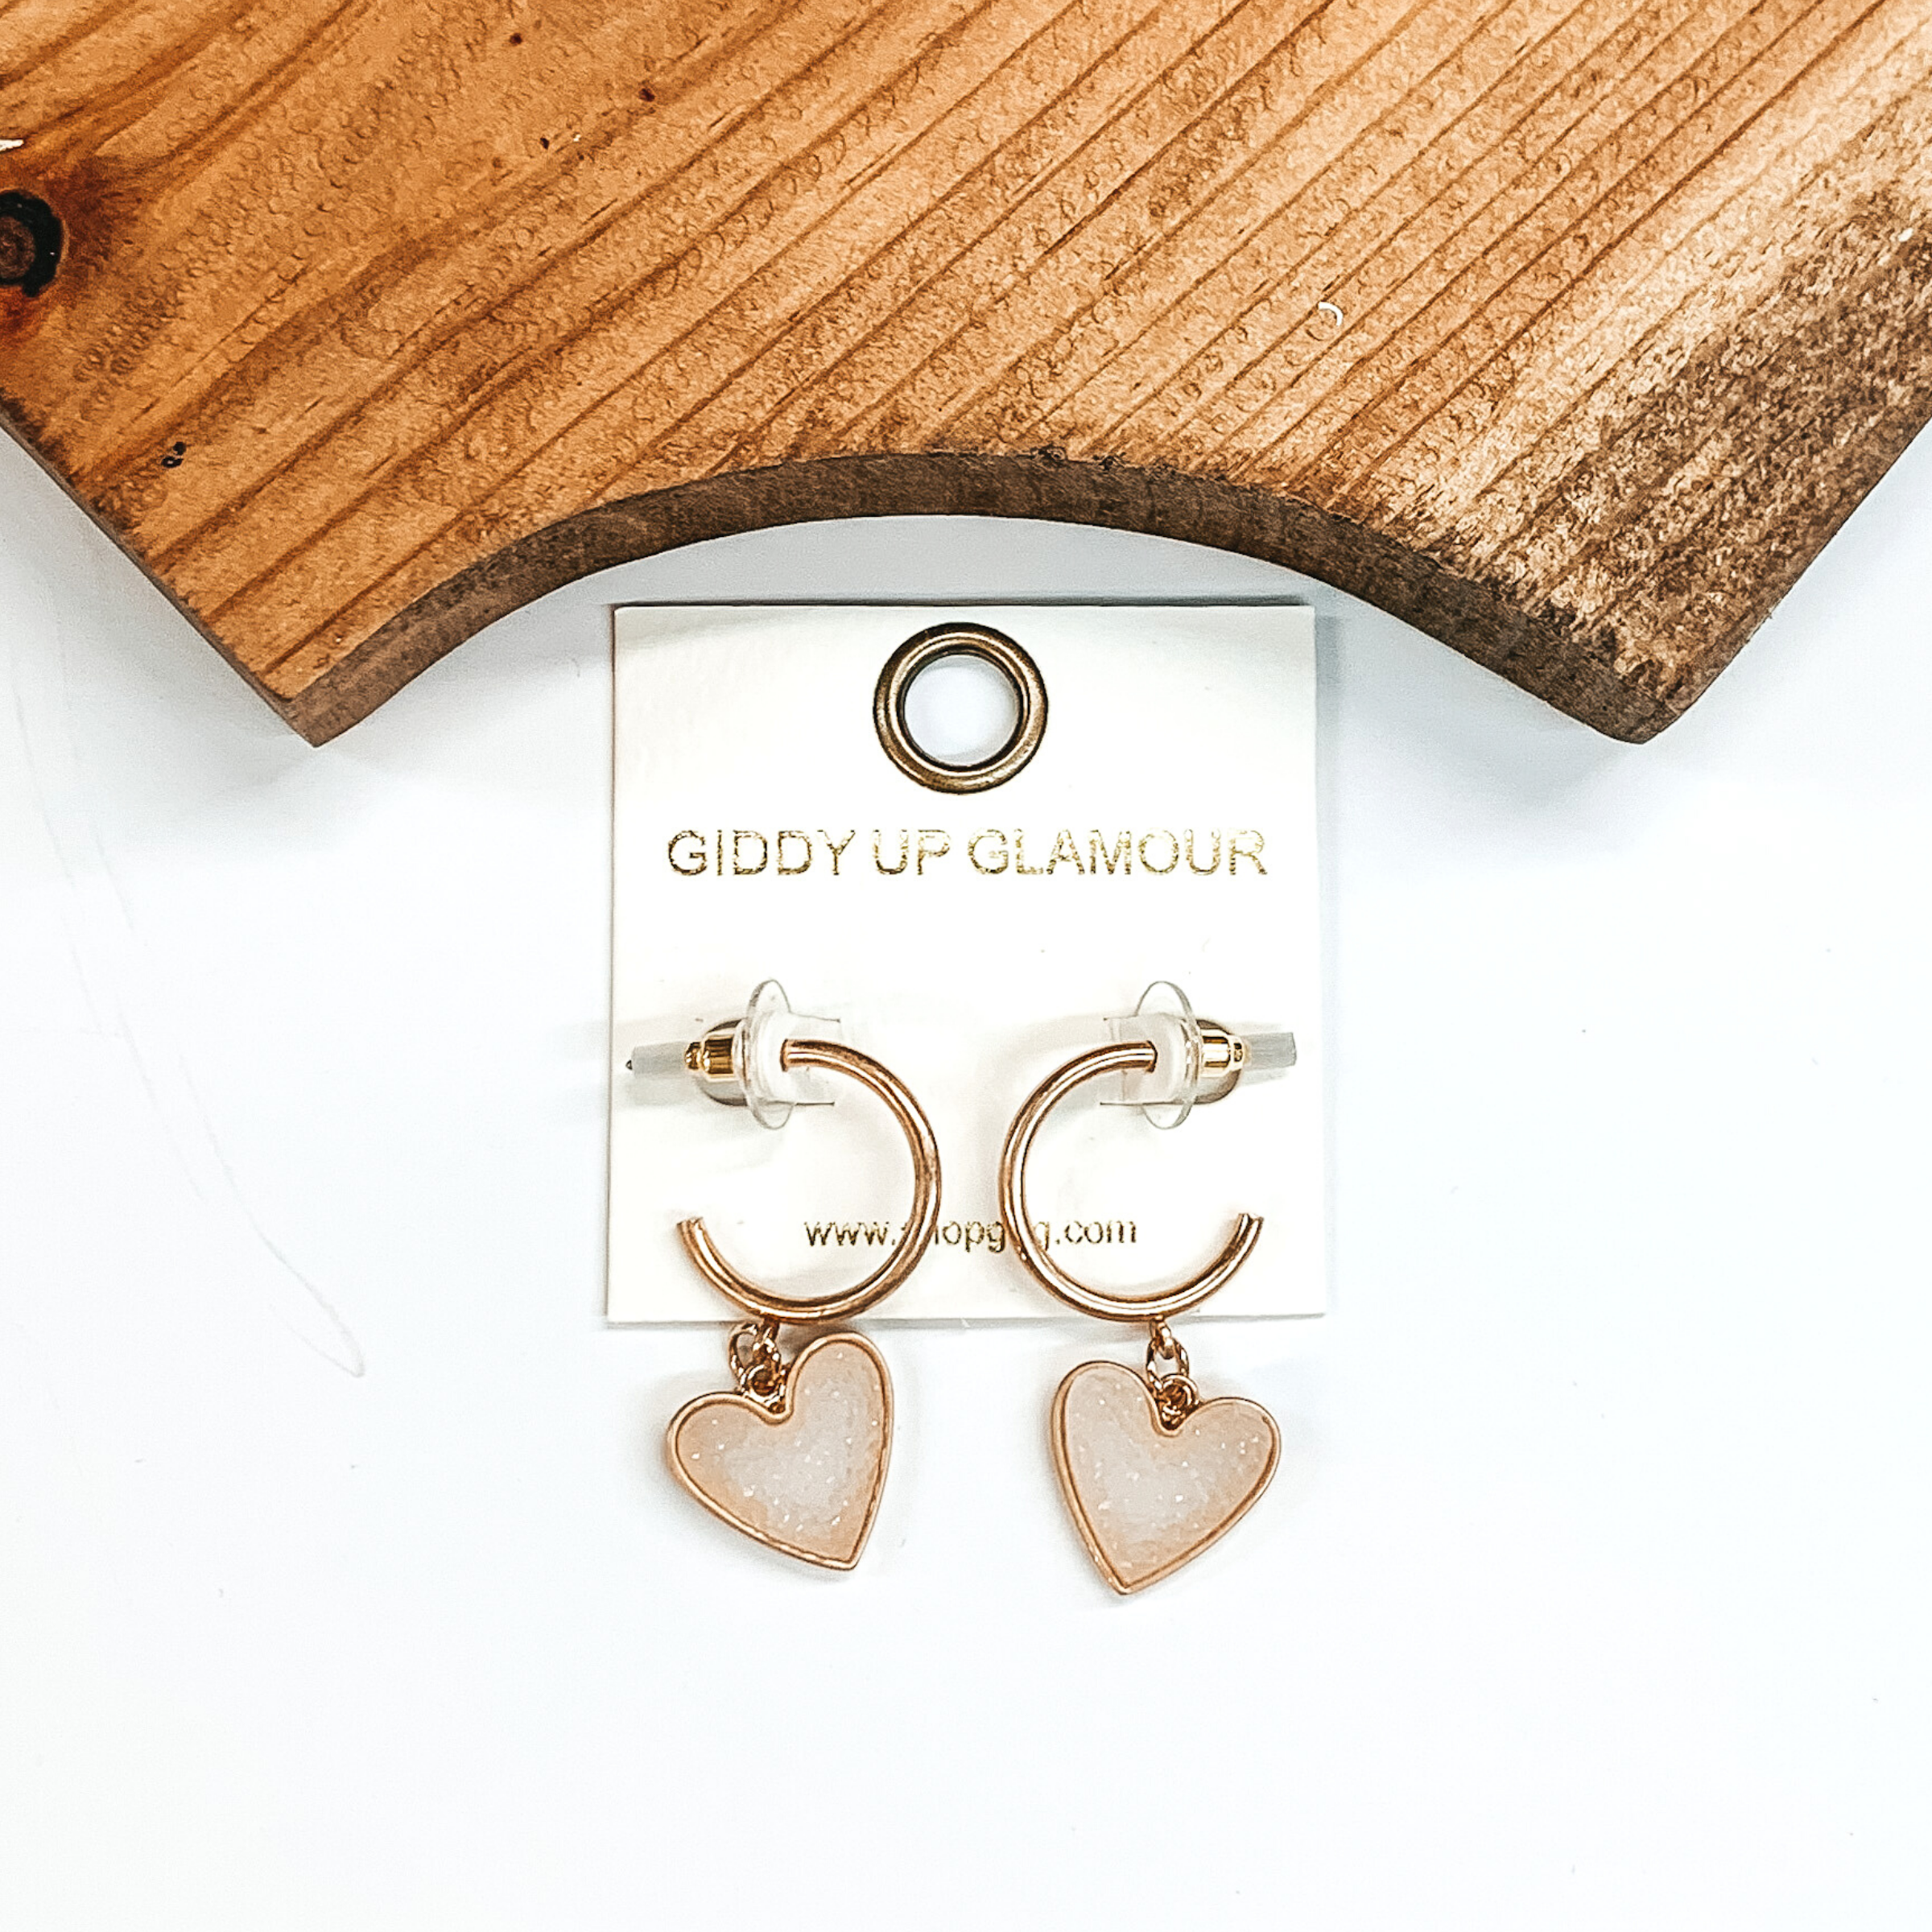 Gold hoop earrings with a white druzy heart charm at the bottom of the hoop. These earring are pictured on a white background with a piece of wood pictured at the top of the picture.